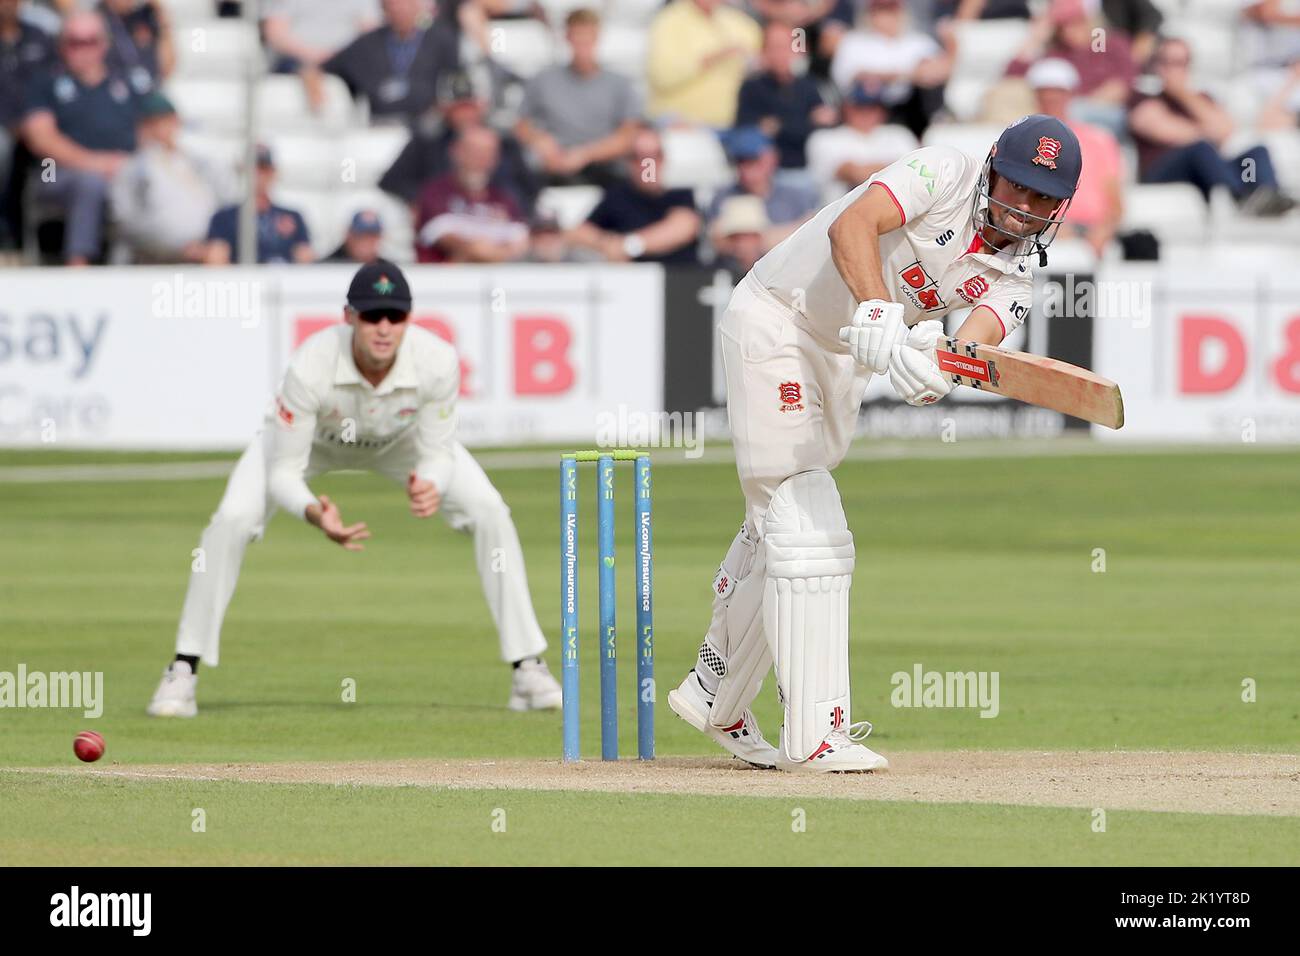 Sir Alastair Cook of Essex in batting action during Essex CCC vs Lancashire CCC, LV Insurance County Championship Division 1 Cricket at The Cloud Coun Stock Photo